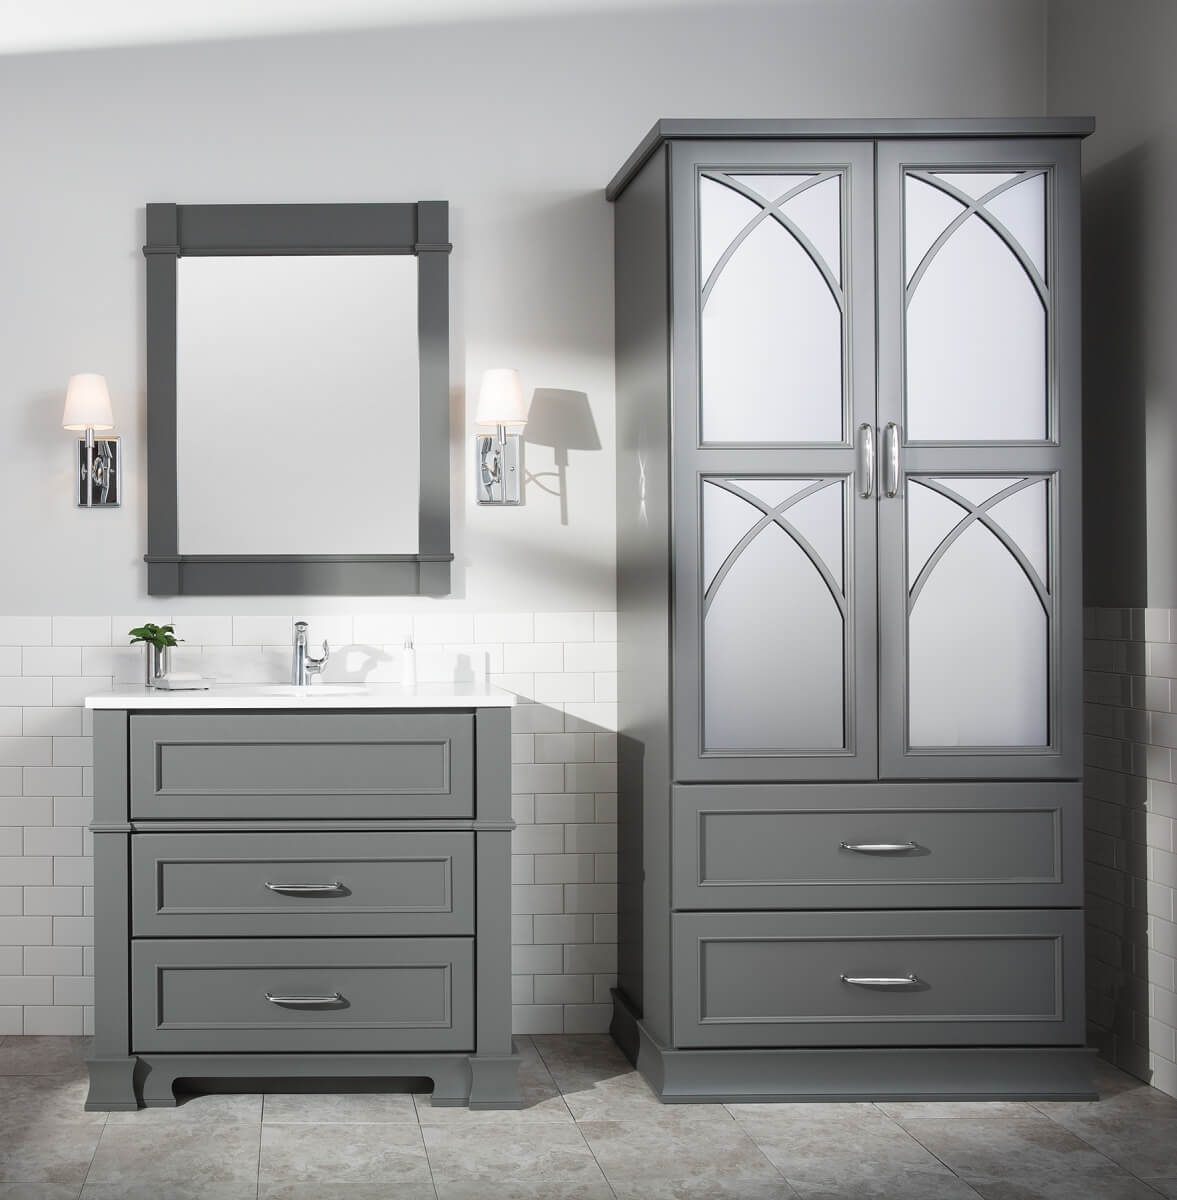 Dark gray bathroom vanity and linen cabinet in a modern bathroom design. Remodeled with a timeless look in mind.